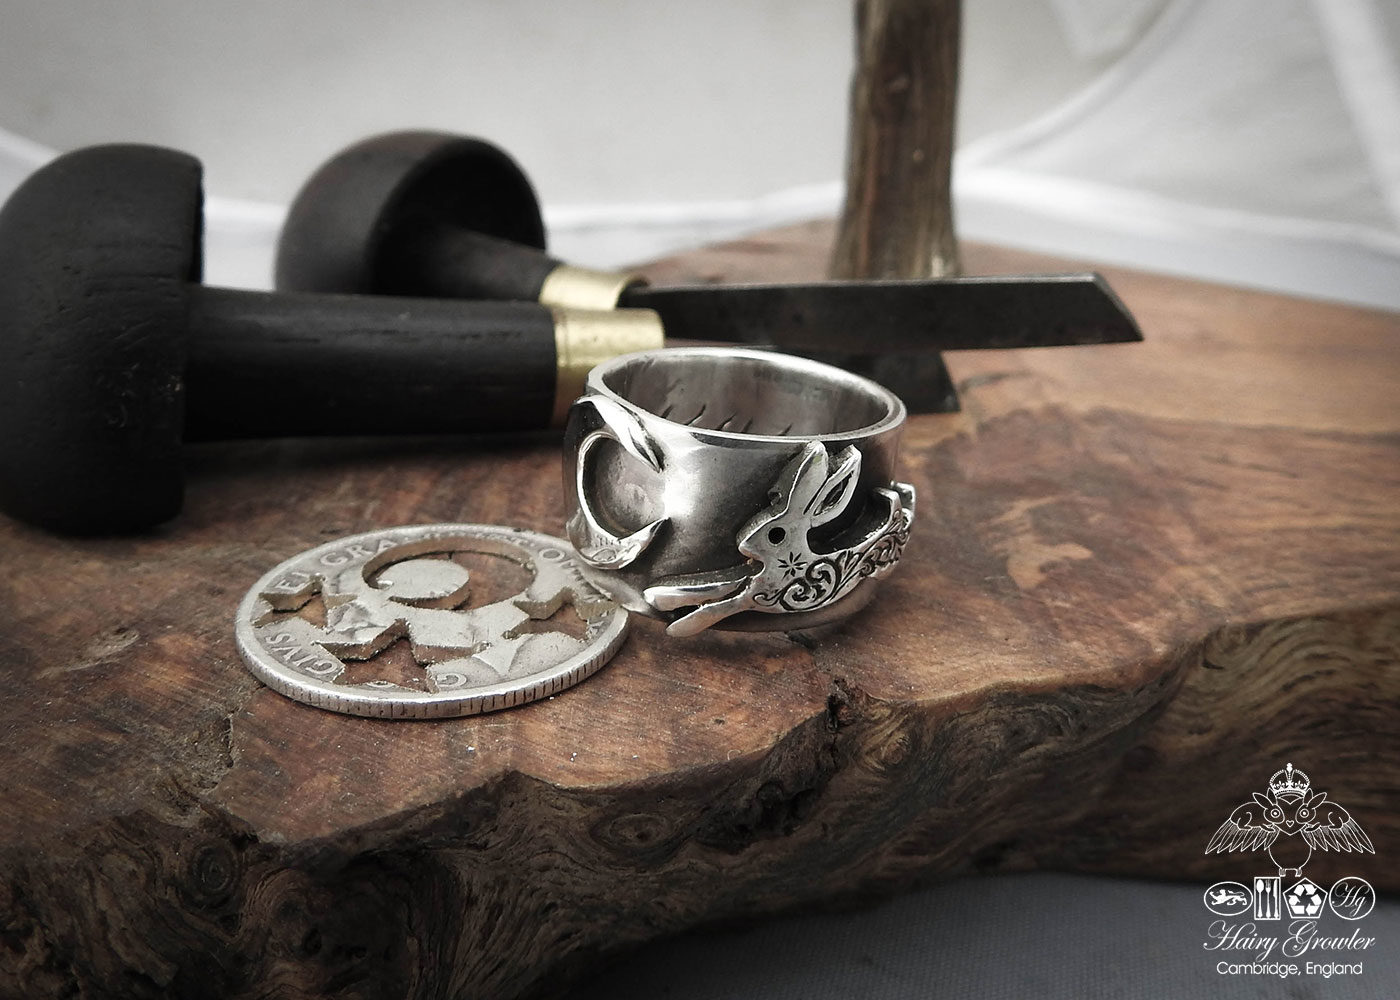 handmade, recycled, repurposed and upcycled leaping hare ring